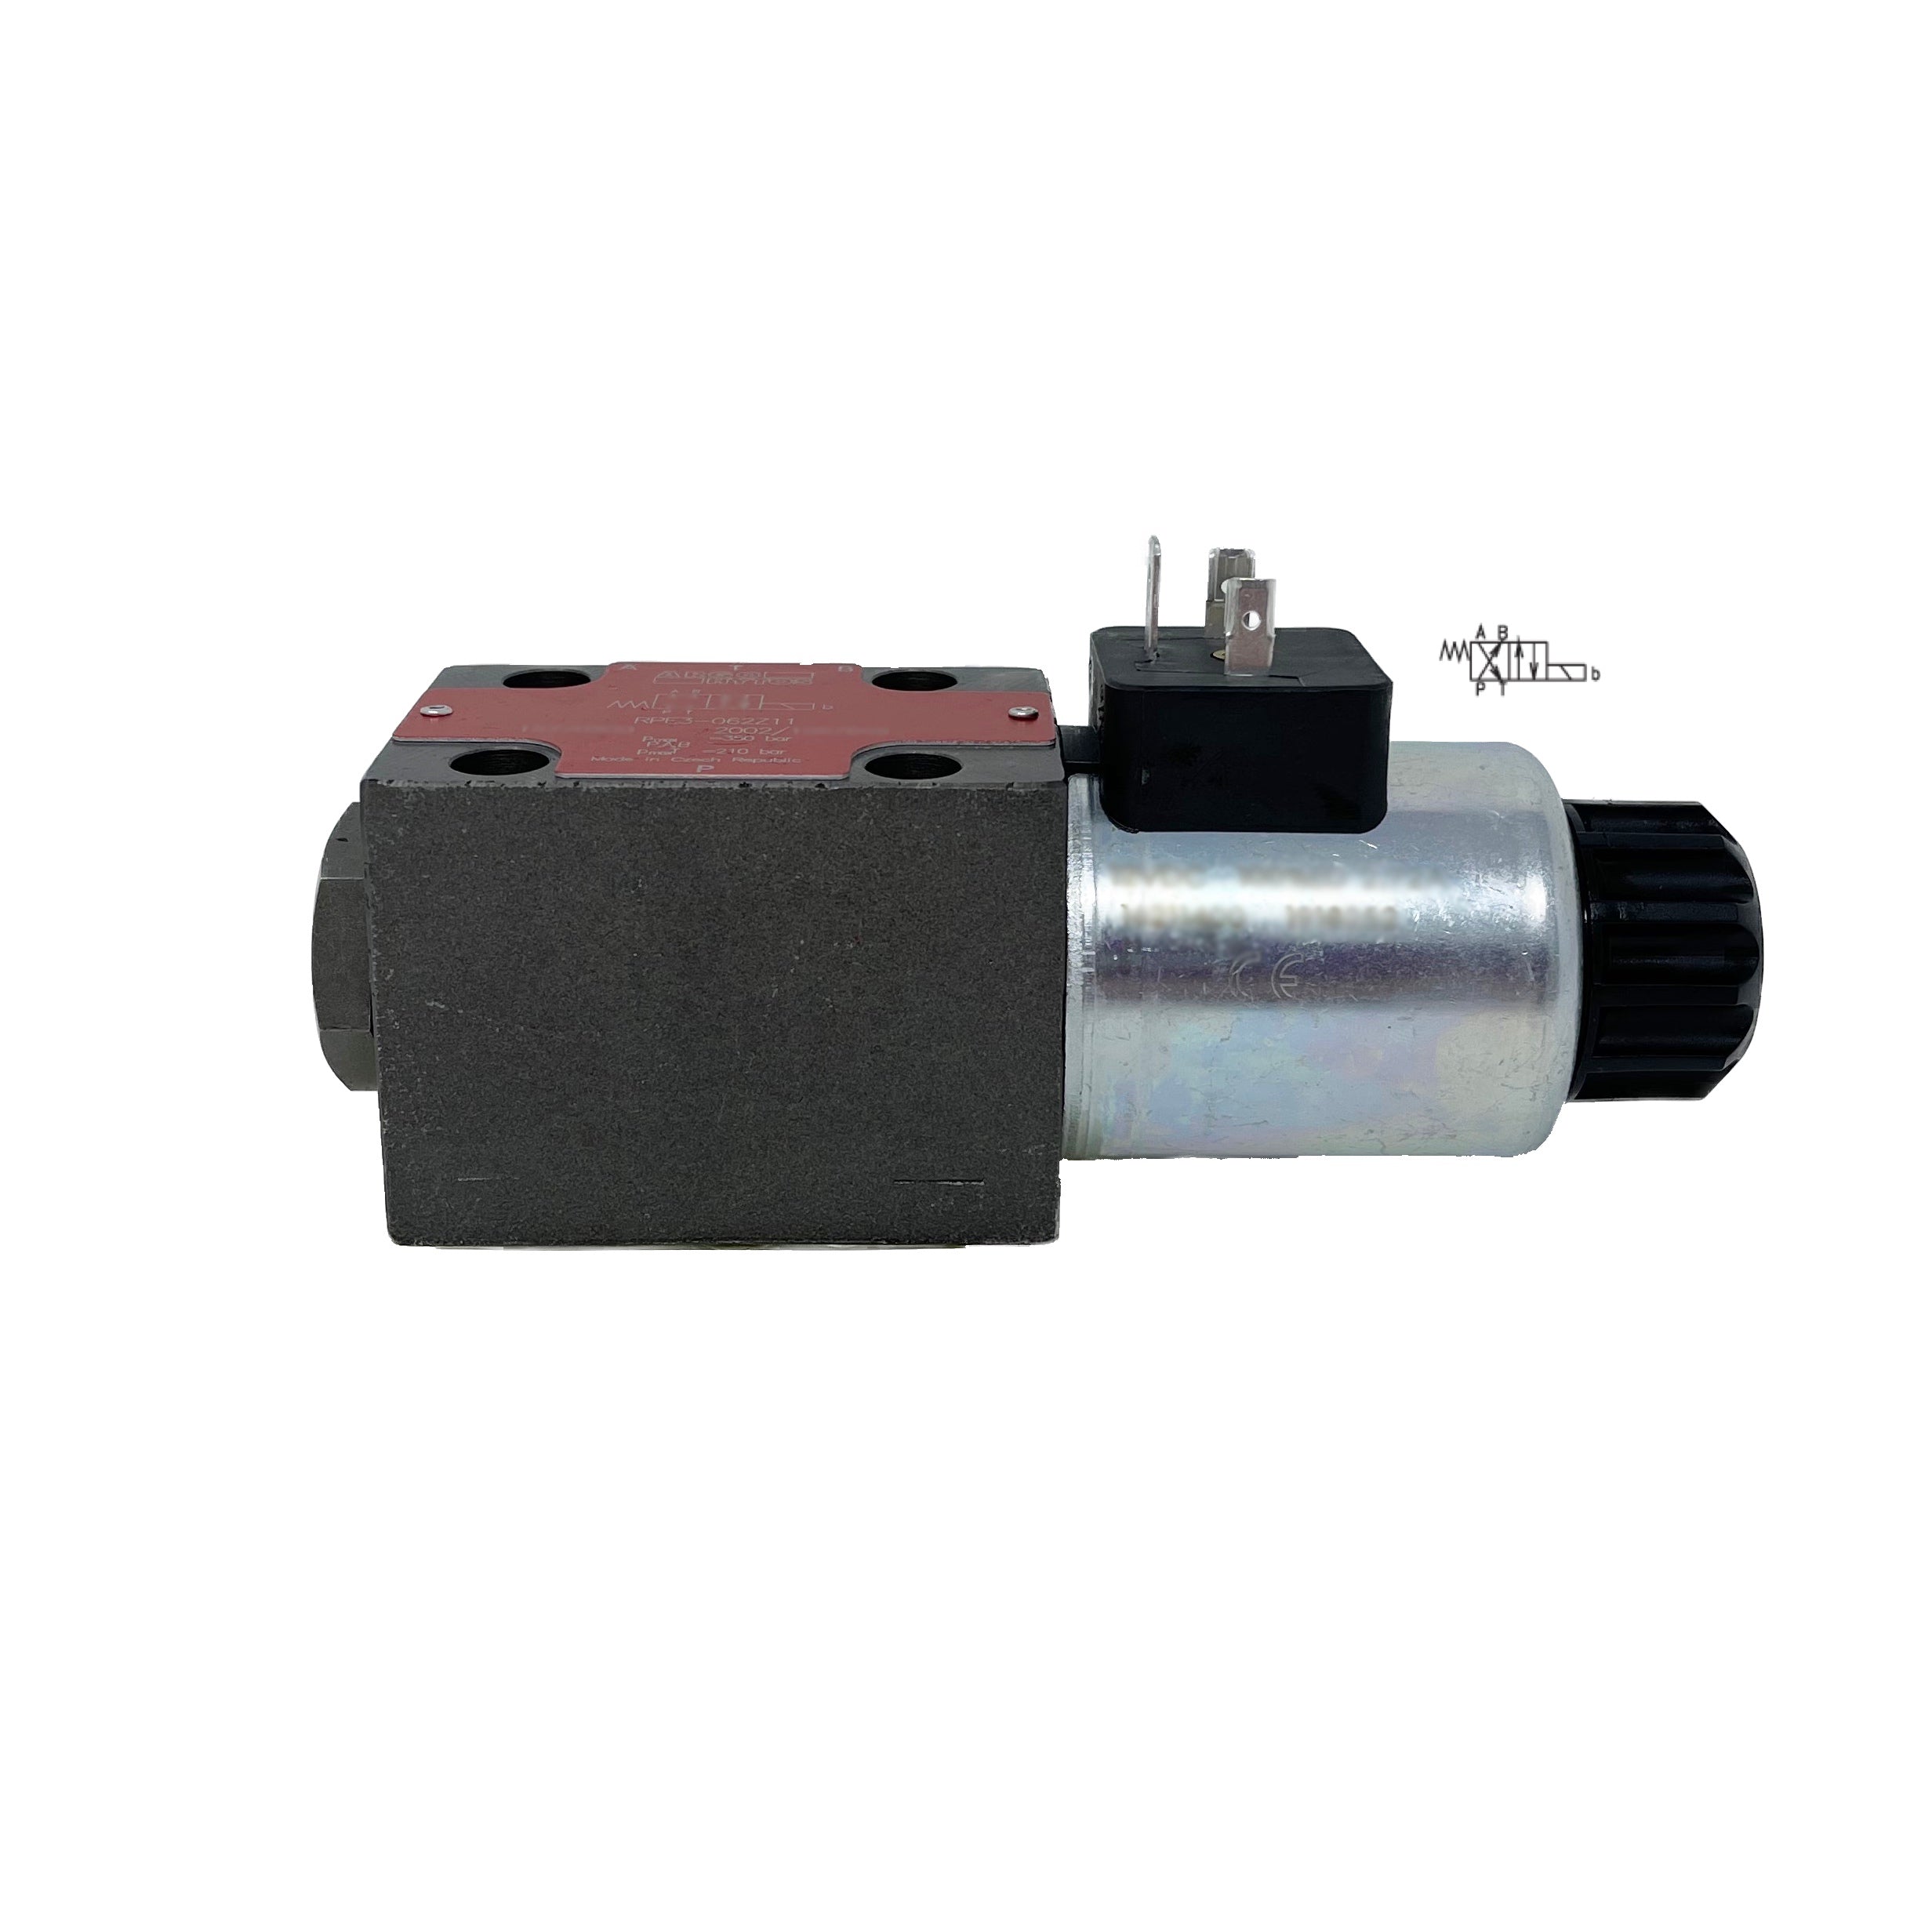 RPE3-062X11/01200E12A : Argo Hytos Directional Control Valve, D03 (NG6), 21GPM, 5100psi, 2P4W, 12 VDC, Deutsch, Spring Return, P to B, A to T in Neutral, Coil Side B